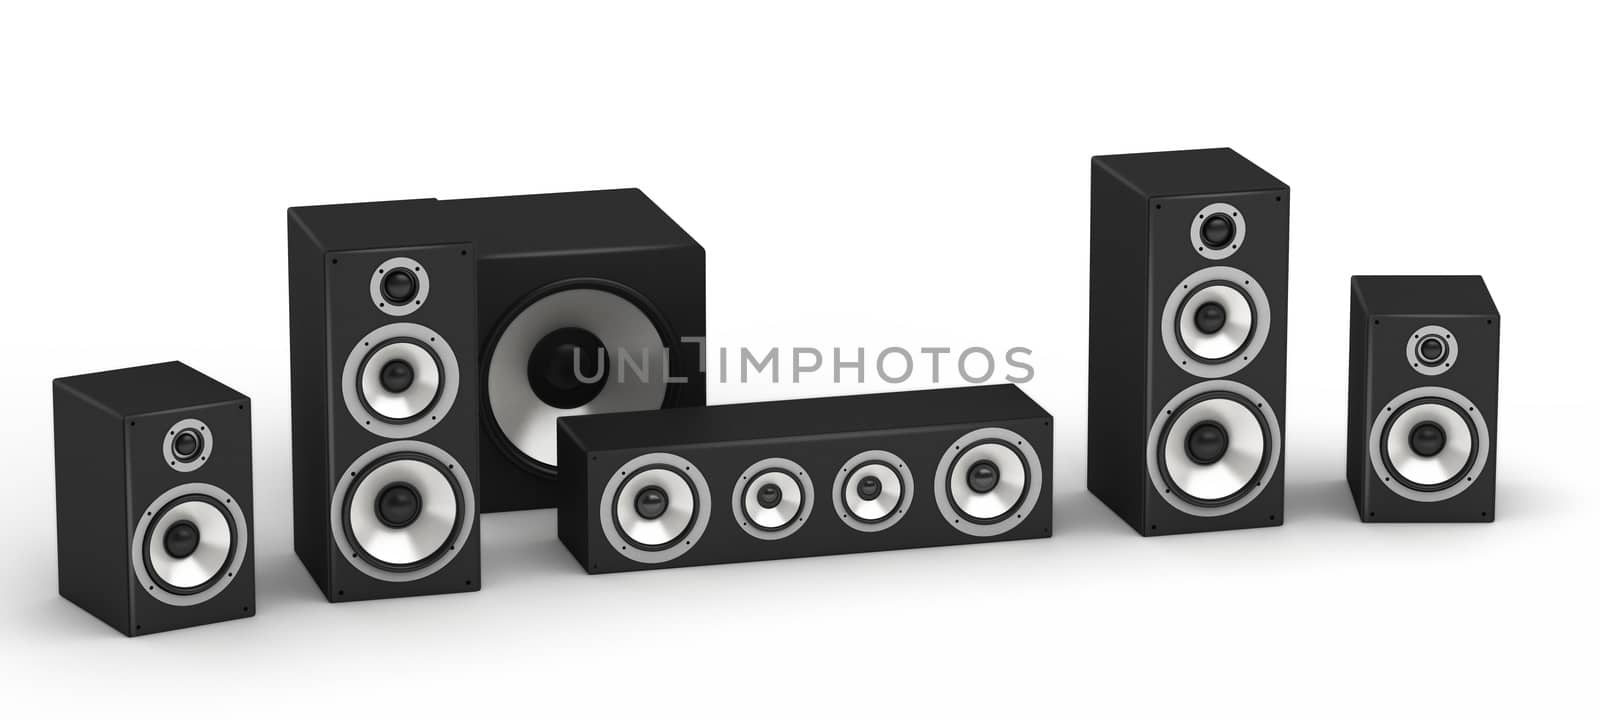 Set of speakers for home theater 5.1 hi-fi audio system on white background